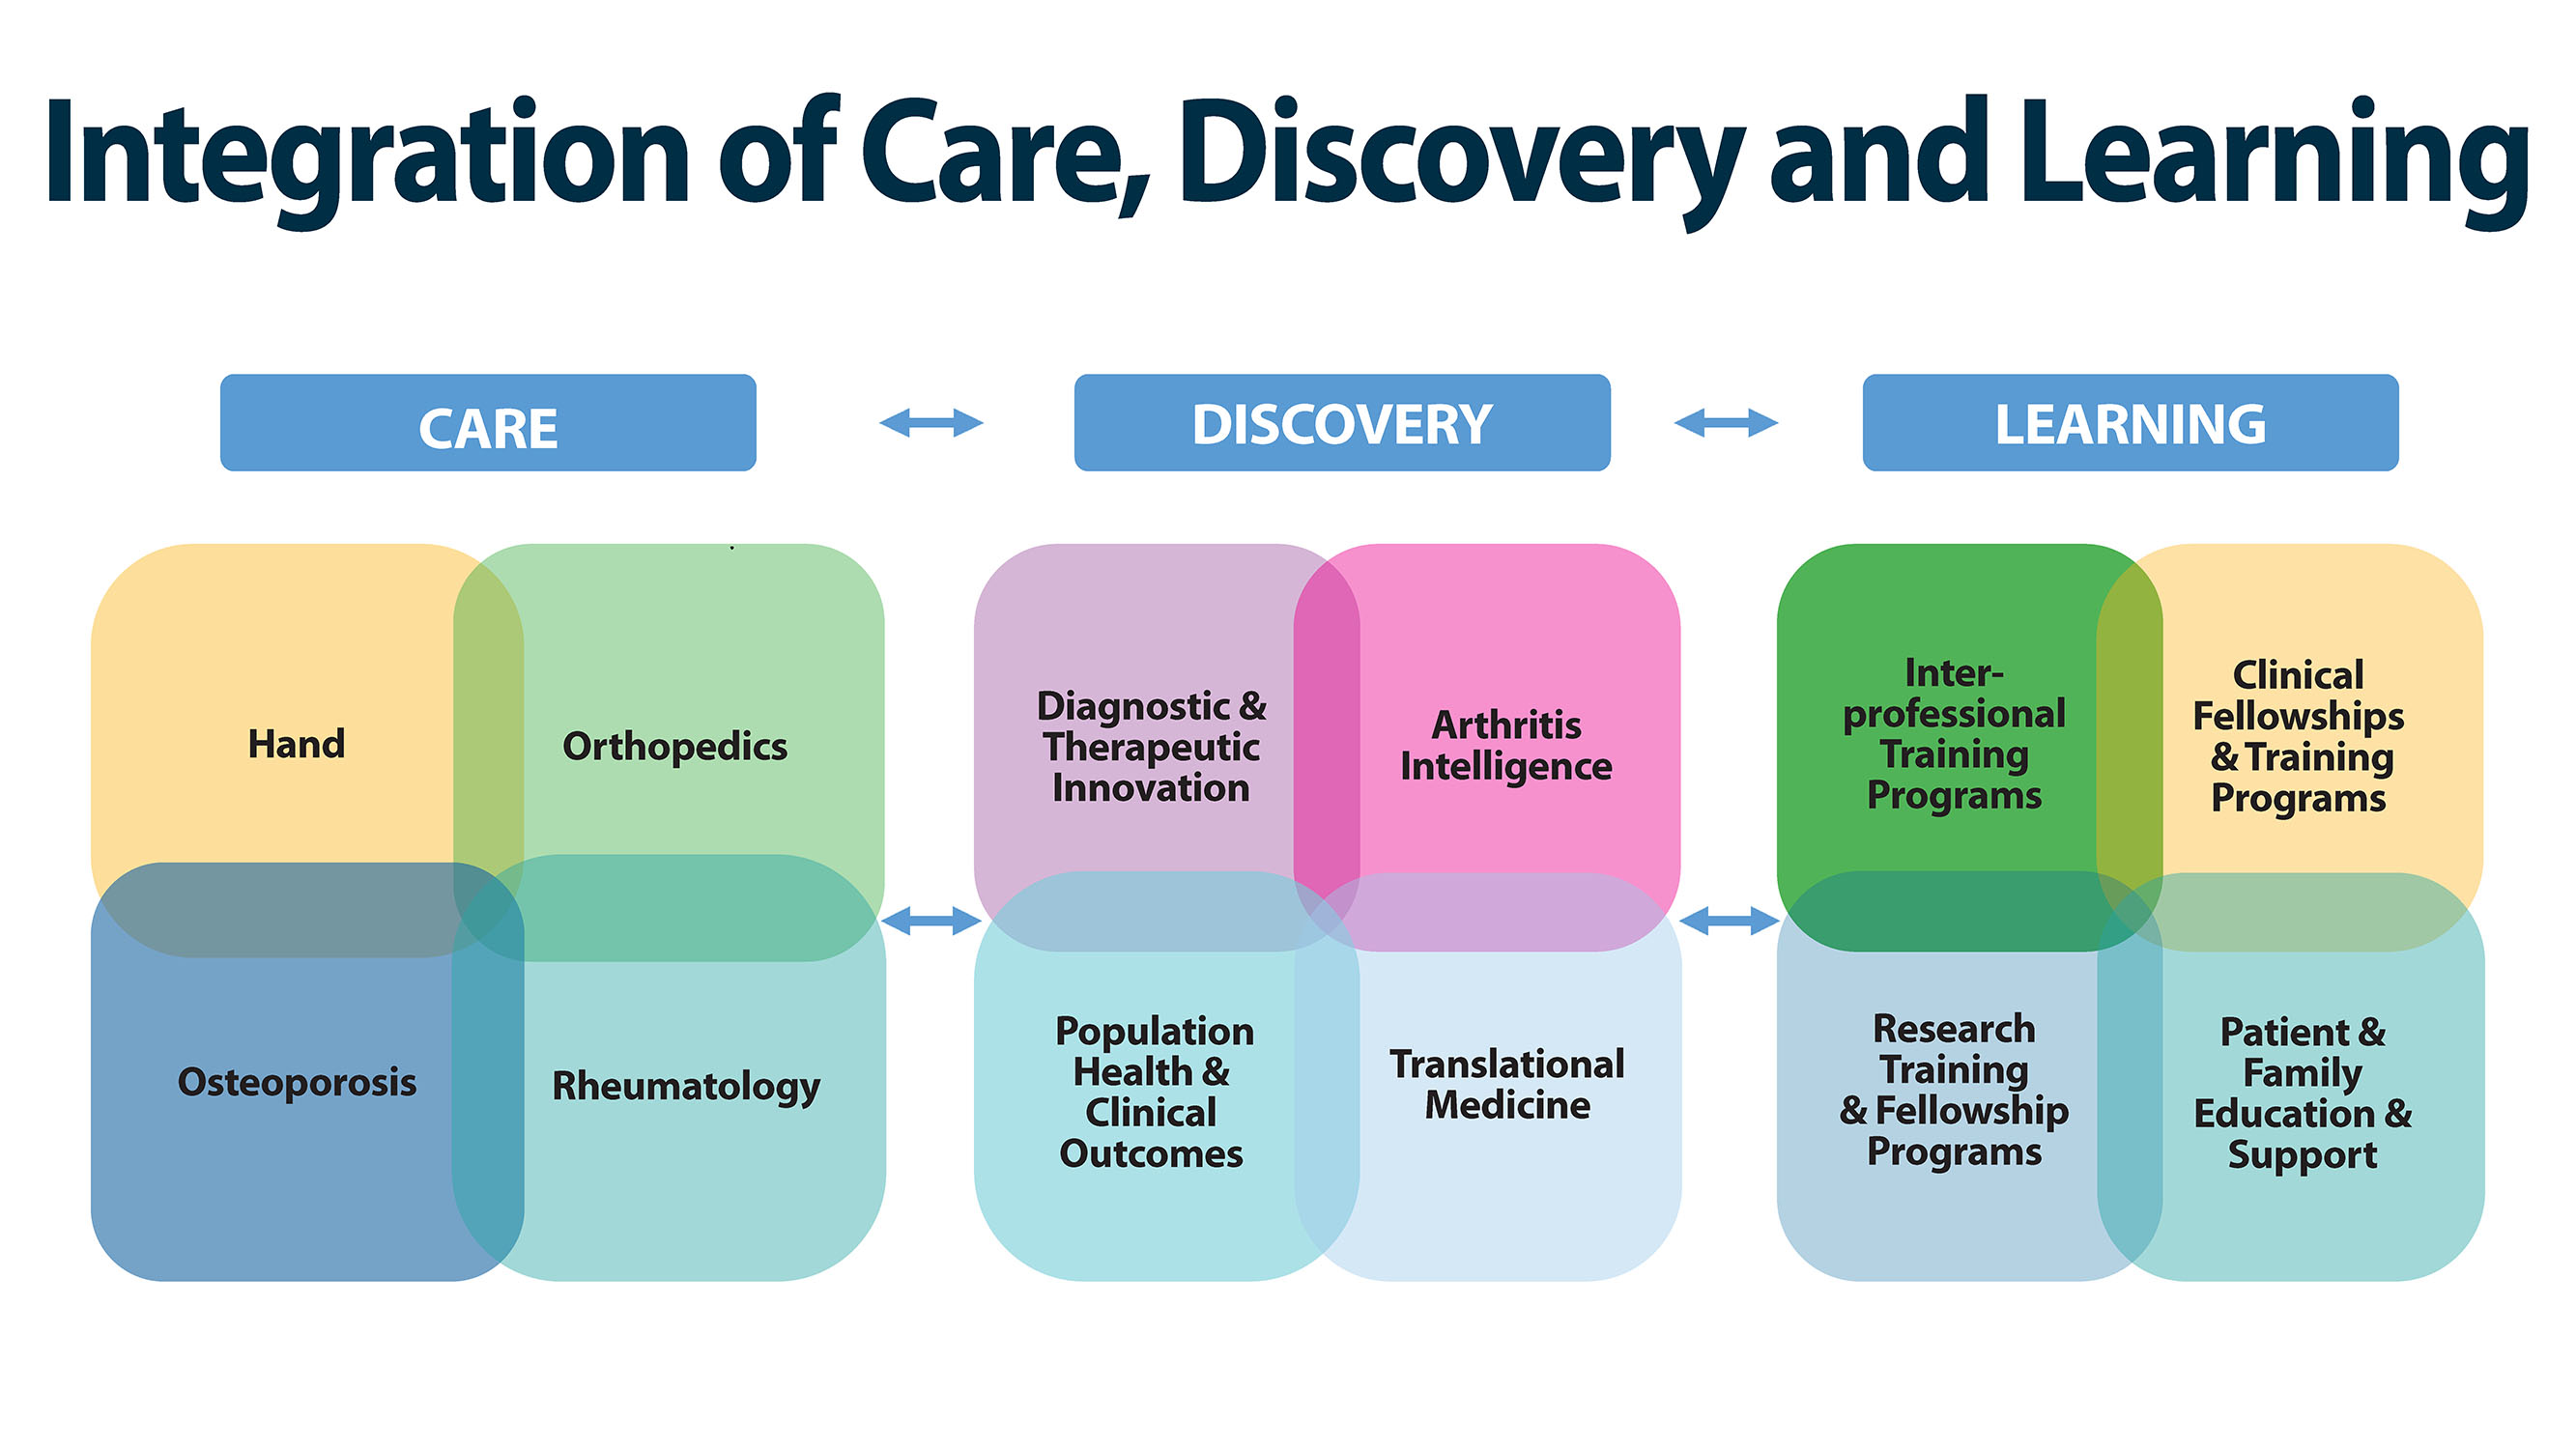 Integration of Care, Discovery and Learning. 1. Care: Hand, Orthopedics, Osteoporosis, Rheumatology. 2. Discovery: Diagnostics and therapeutic innovation; arthritis intelligence; population health and clinical outcomes; translational medicine. 3. Learning: Interprofessional training programs; clinical fellowships and training programs; research training and fellowship programs; patient and family education and support